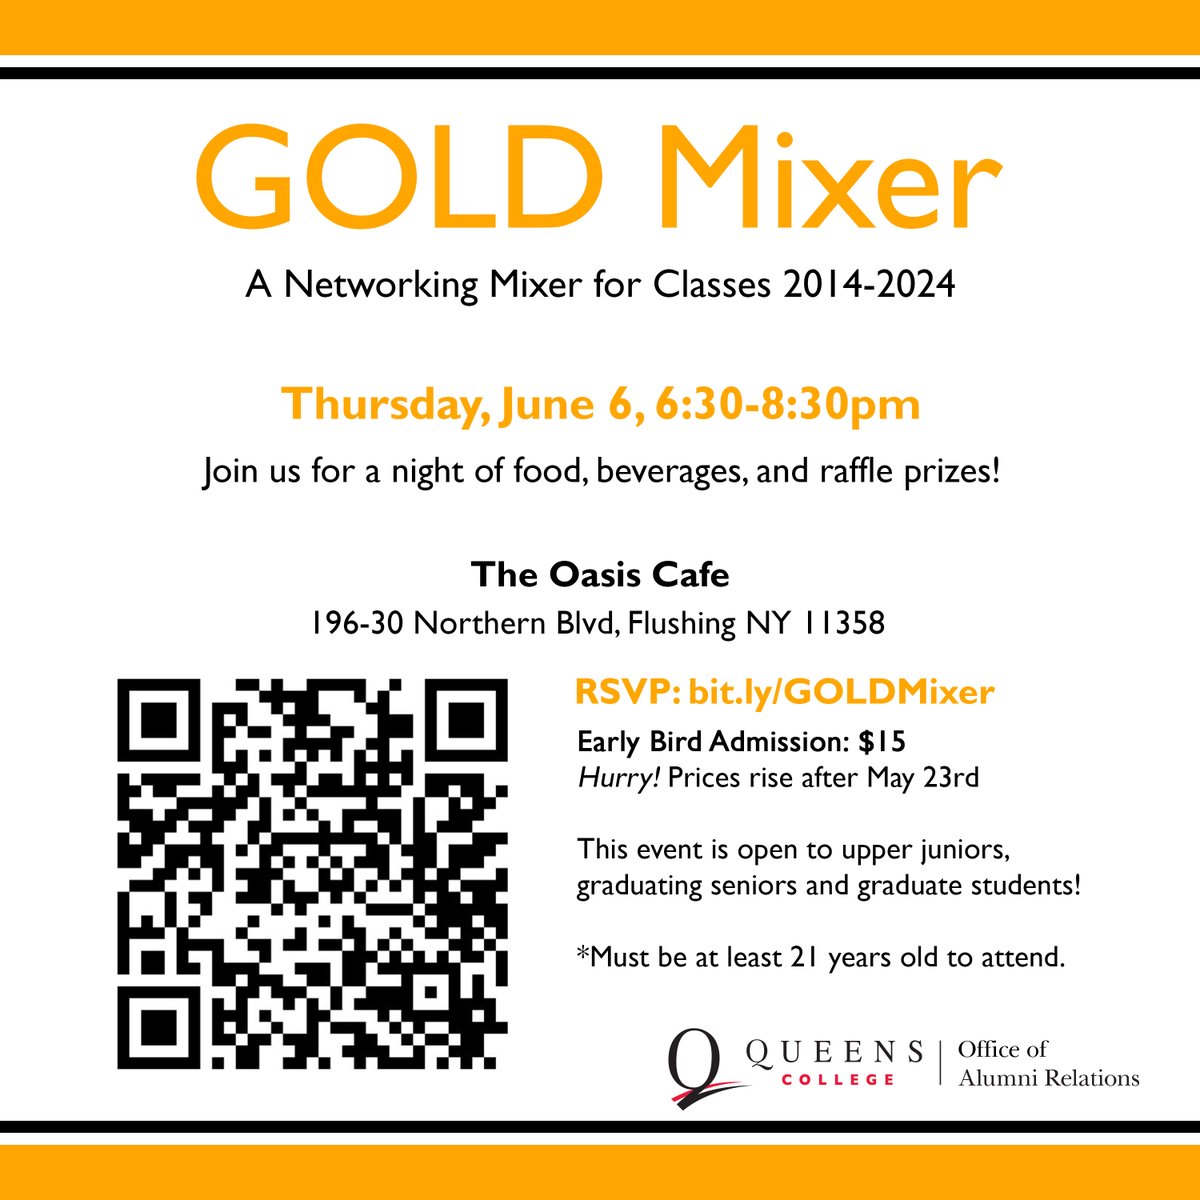 Attention all #QCGOLD, alumni, juniors/seniors, & grad students. You're invited to Oasis Café on 6/6 @ 6:30pm for our QC GOLD Mixer!  RSVP by May 23rd for 40% OFF Early Bird Special ($15): bit.ly/GOLDMixer. Admission includes: Food, beverages, & raffle entry!